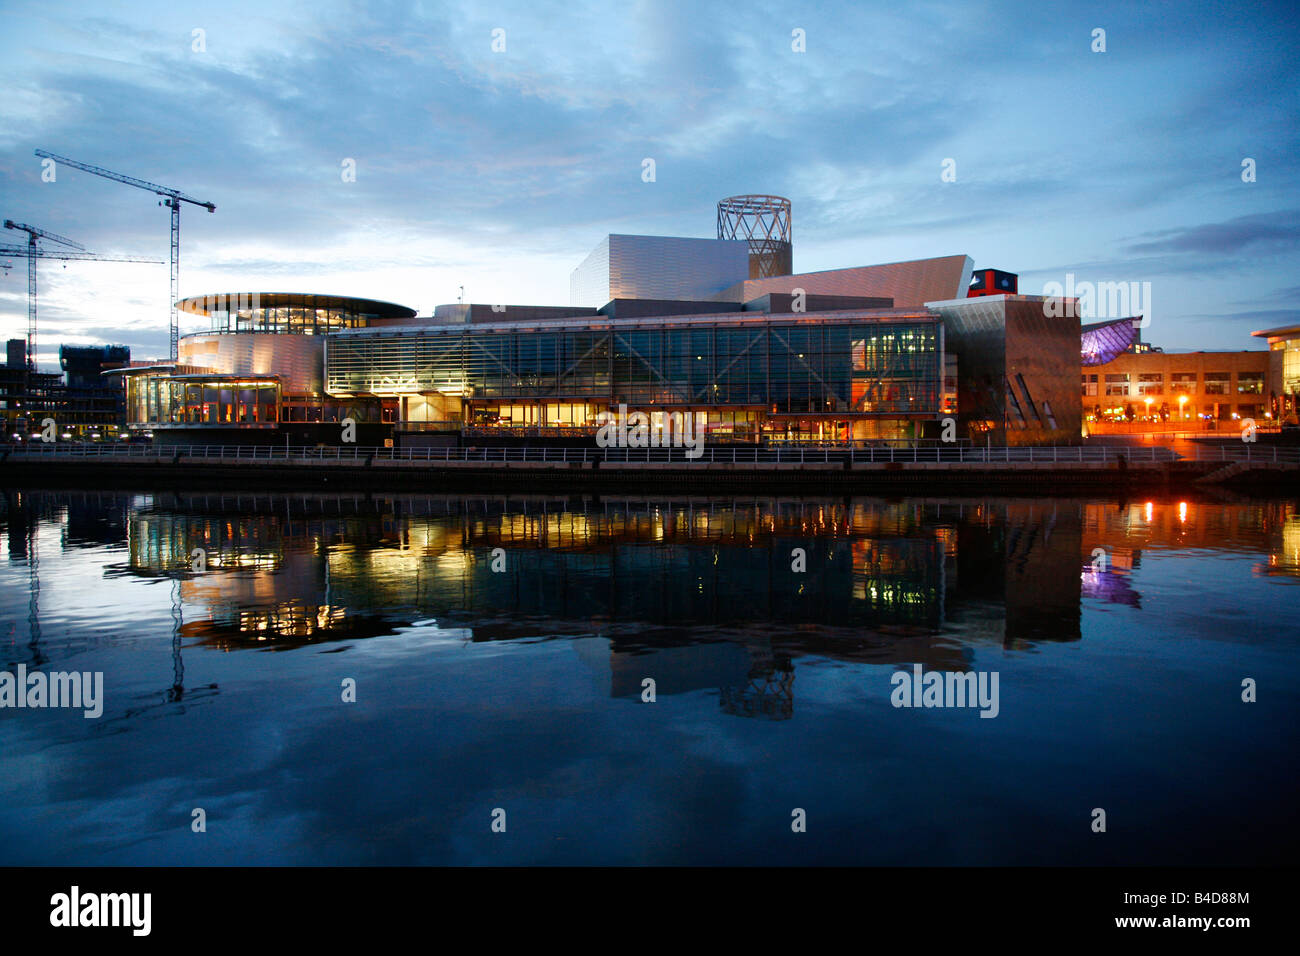 Juli 2008 - die Lowry in Salford Quays Manchester England UK Stockfoto